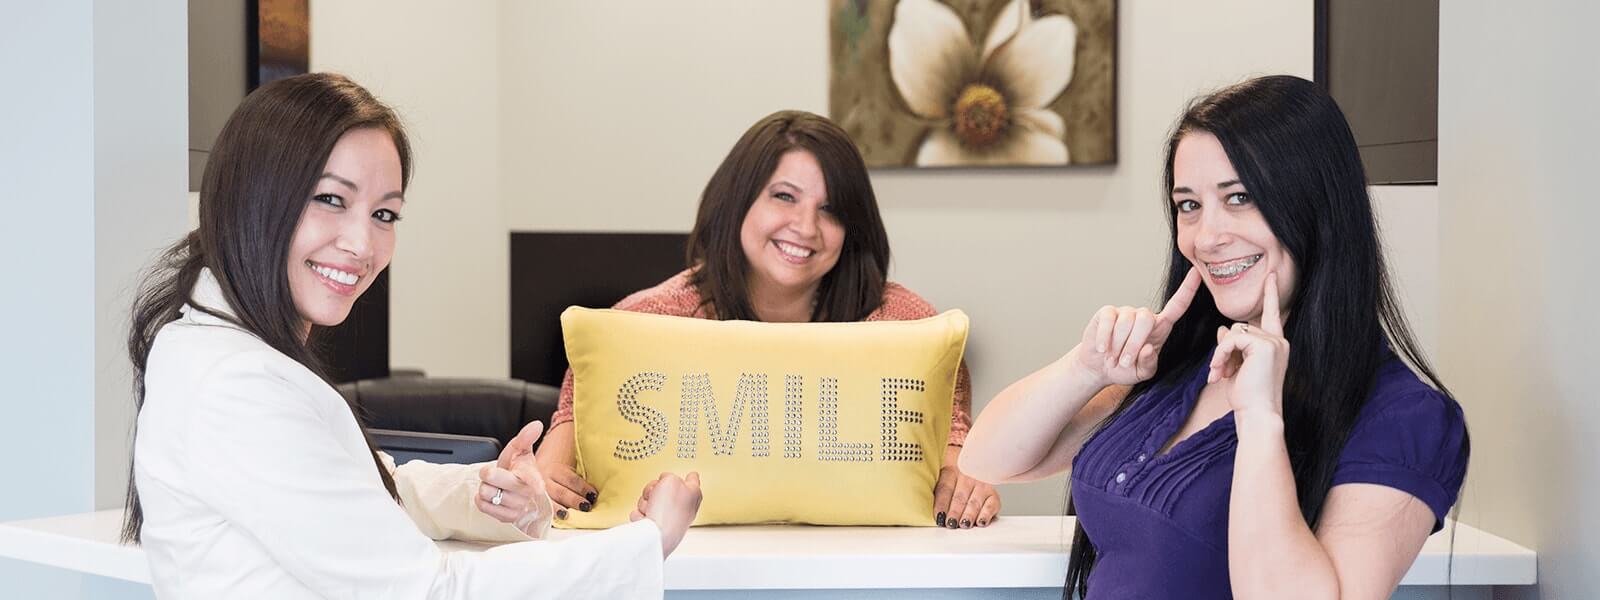 Dr. Tran and two team members smiling and holding up a yellow pillow that says Smile